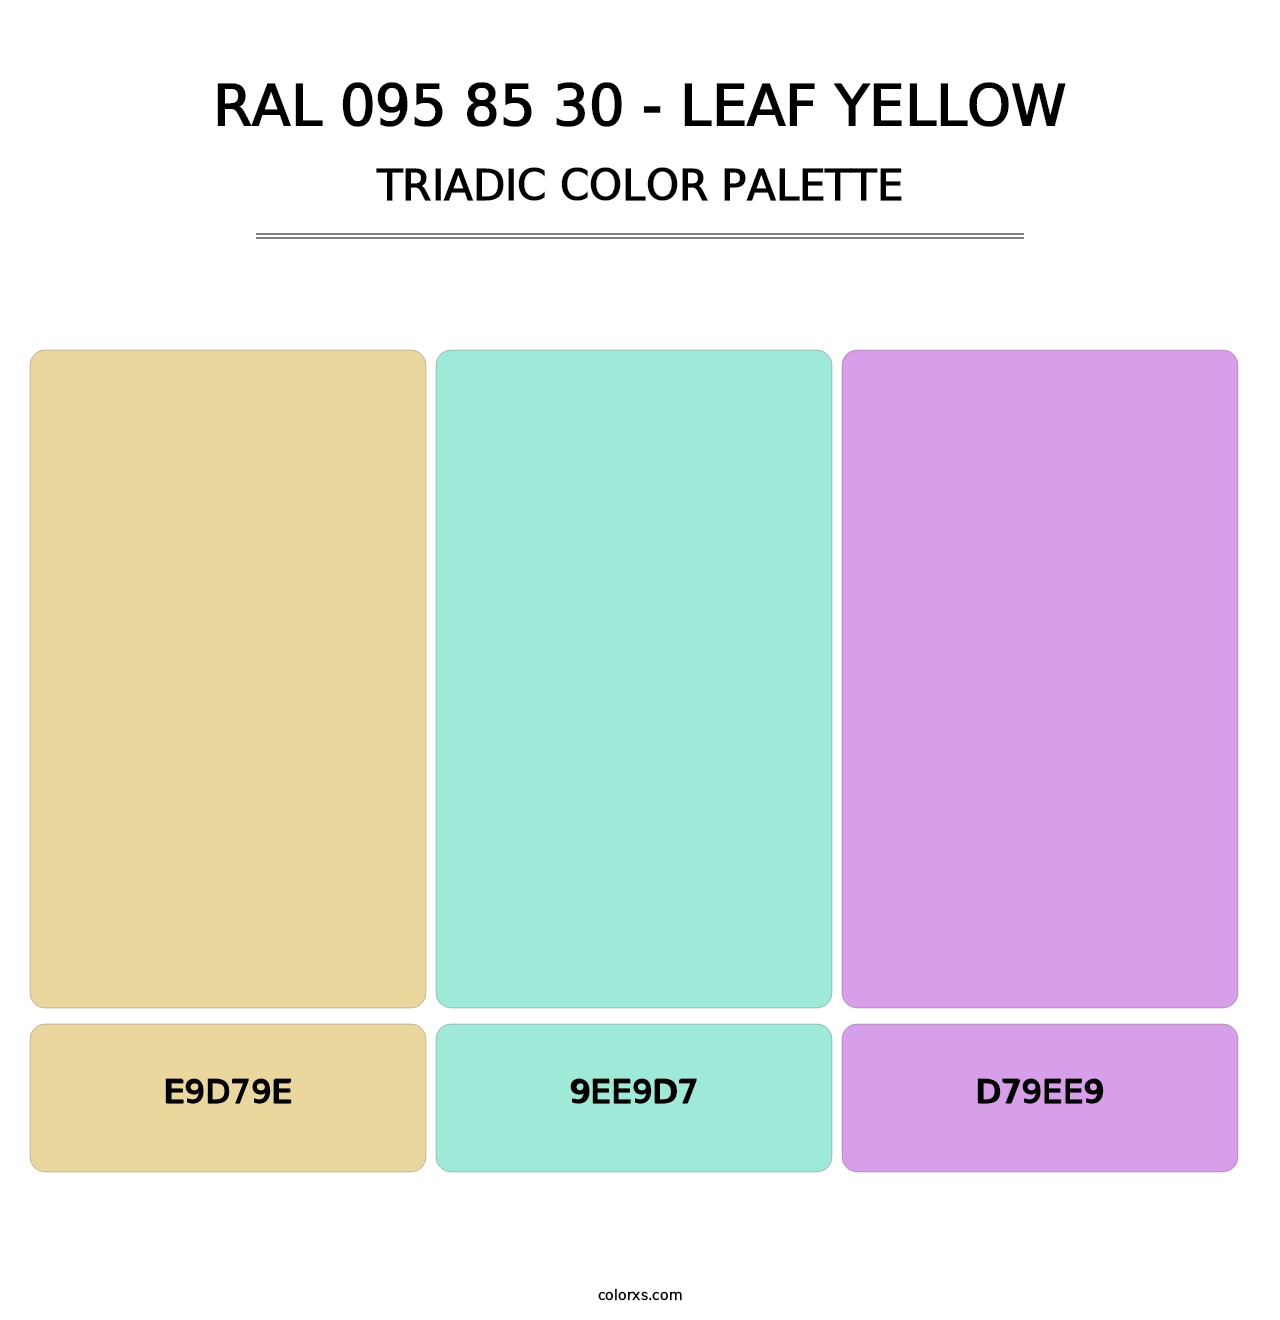 RAL 095 85 30 - Leaf Yellow - Triadic Color Palette